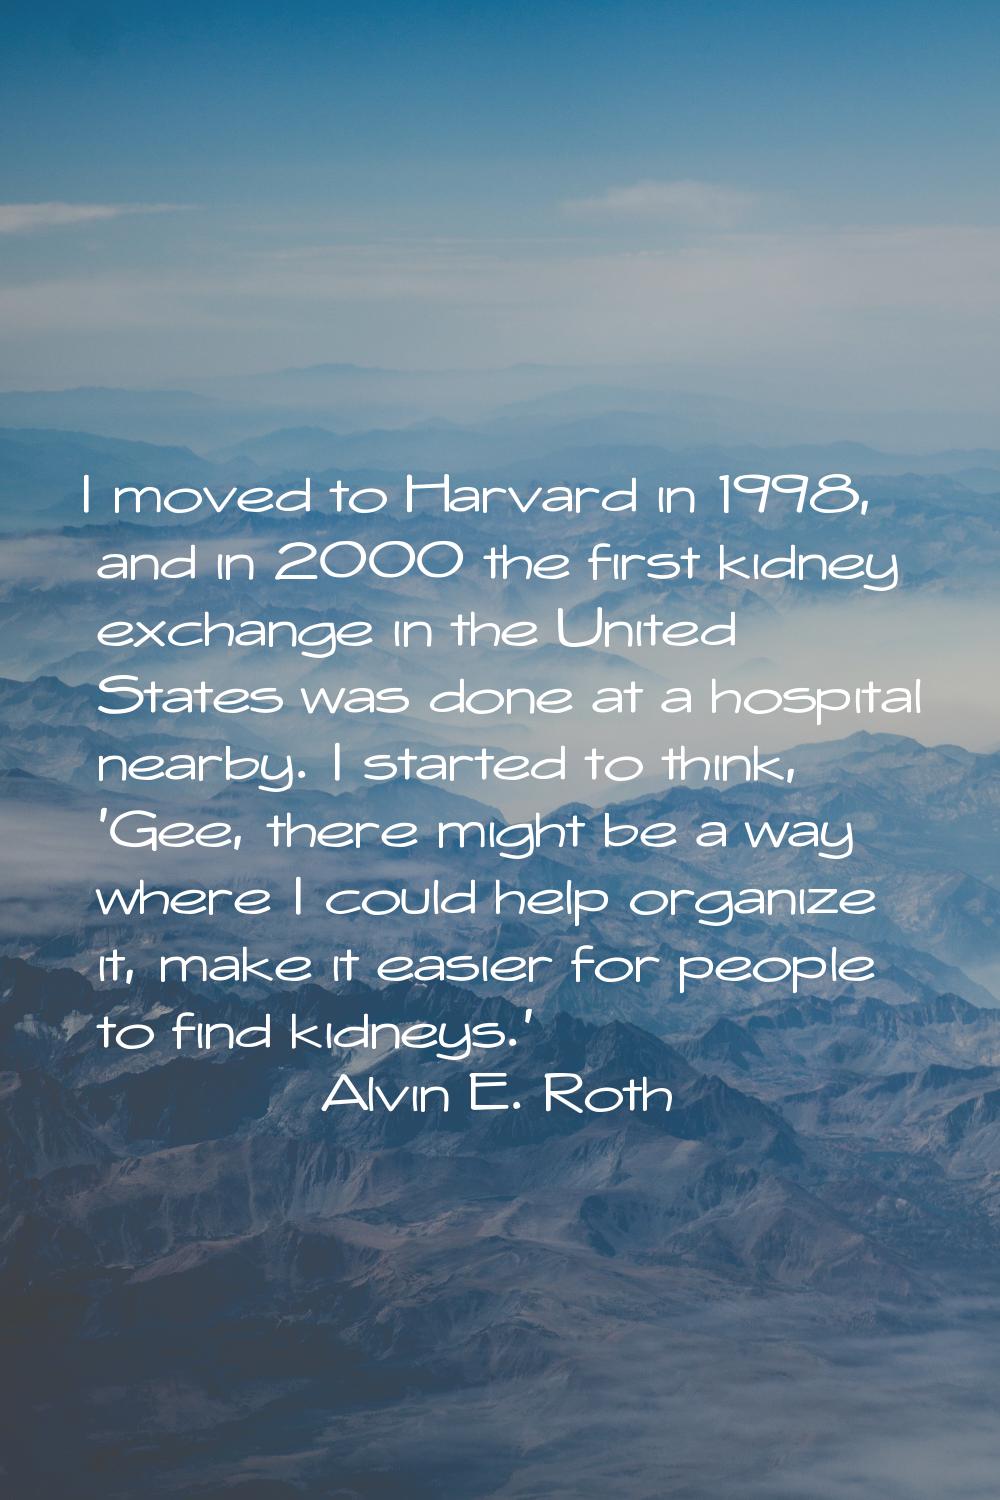 I moved to Harvard in 1998, and in 2000 the first kidney exchange in the United States was done at 